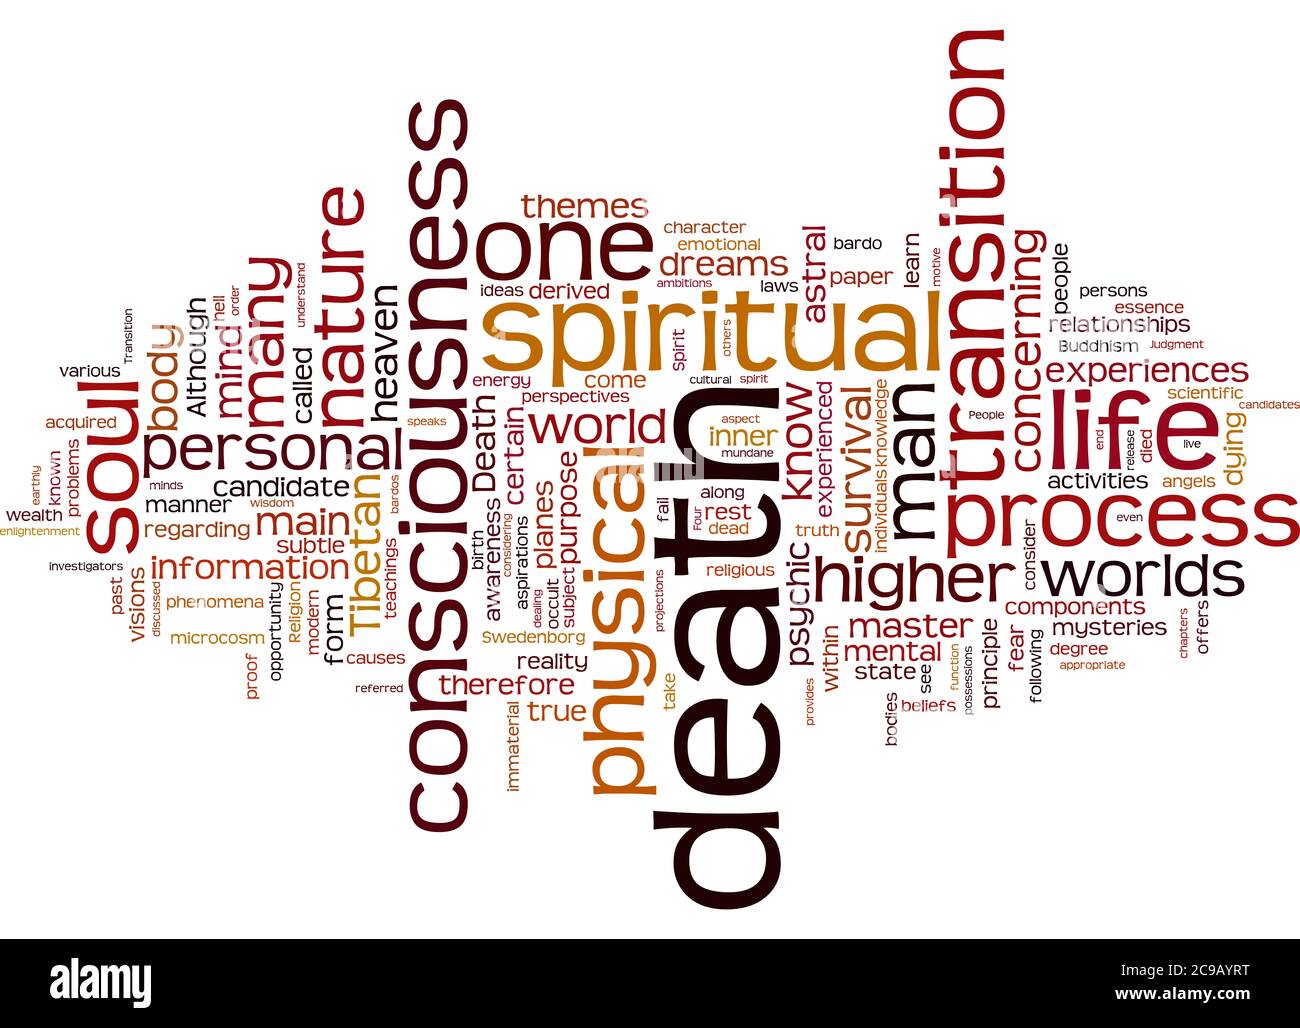 Word Cloud Summary Of The Metaphysical View Of Death And Life After Death Part 2 Article Stock Photo Alamy